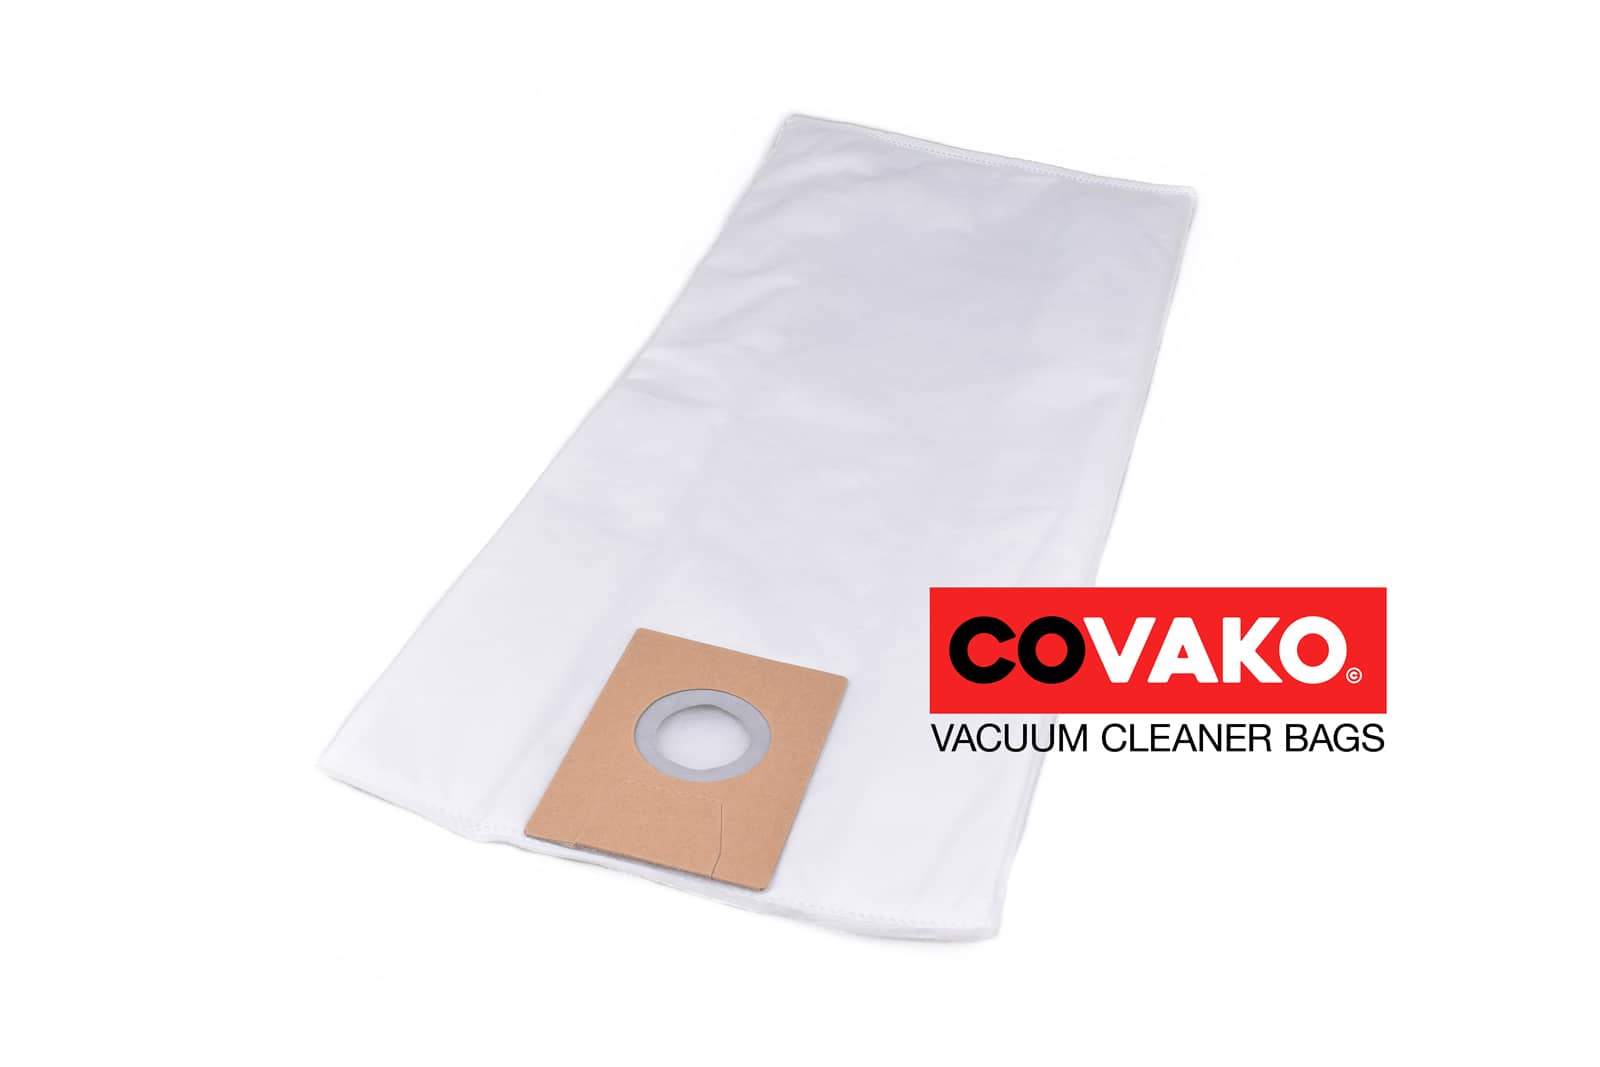 Viper LSU 135 / Synthesis - Viper vacuum cleaner bags